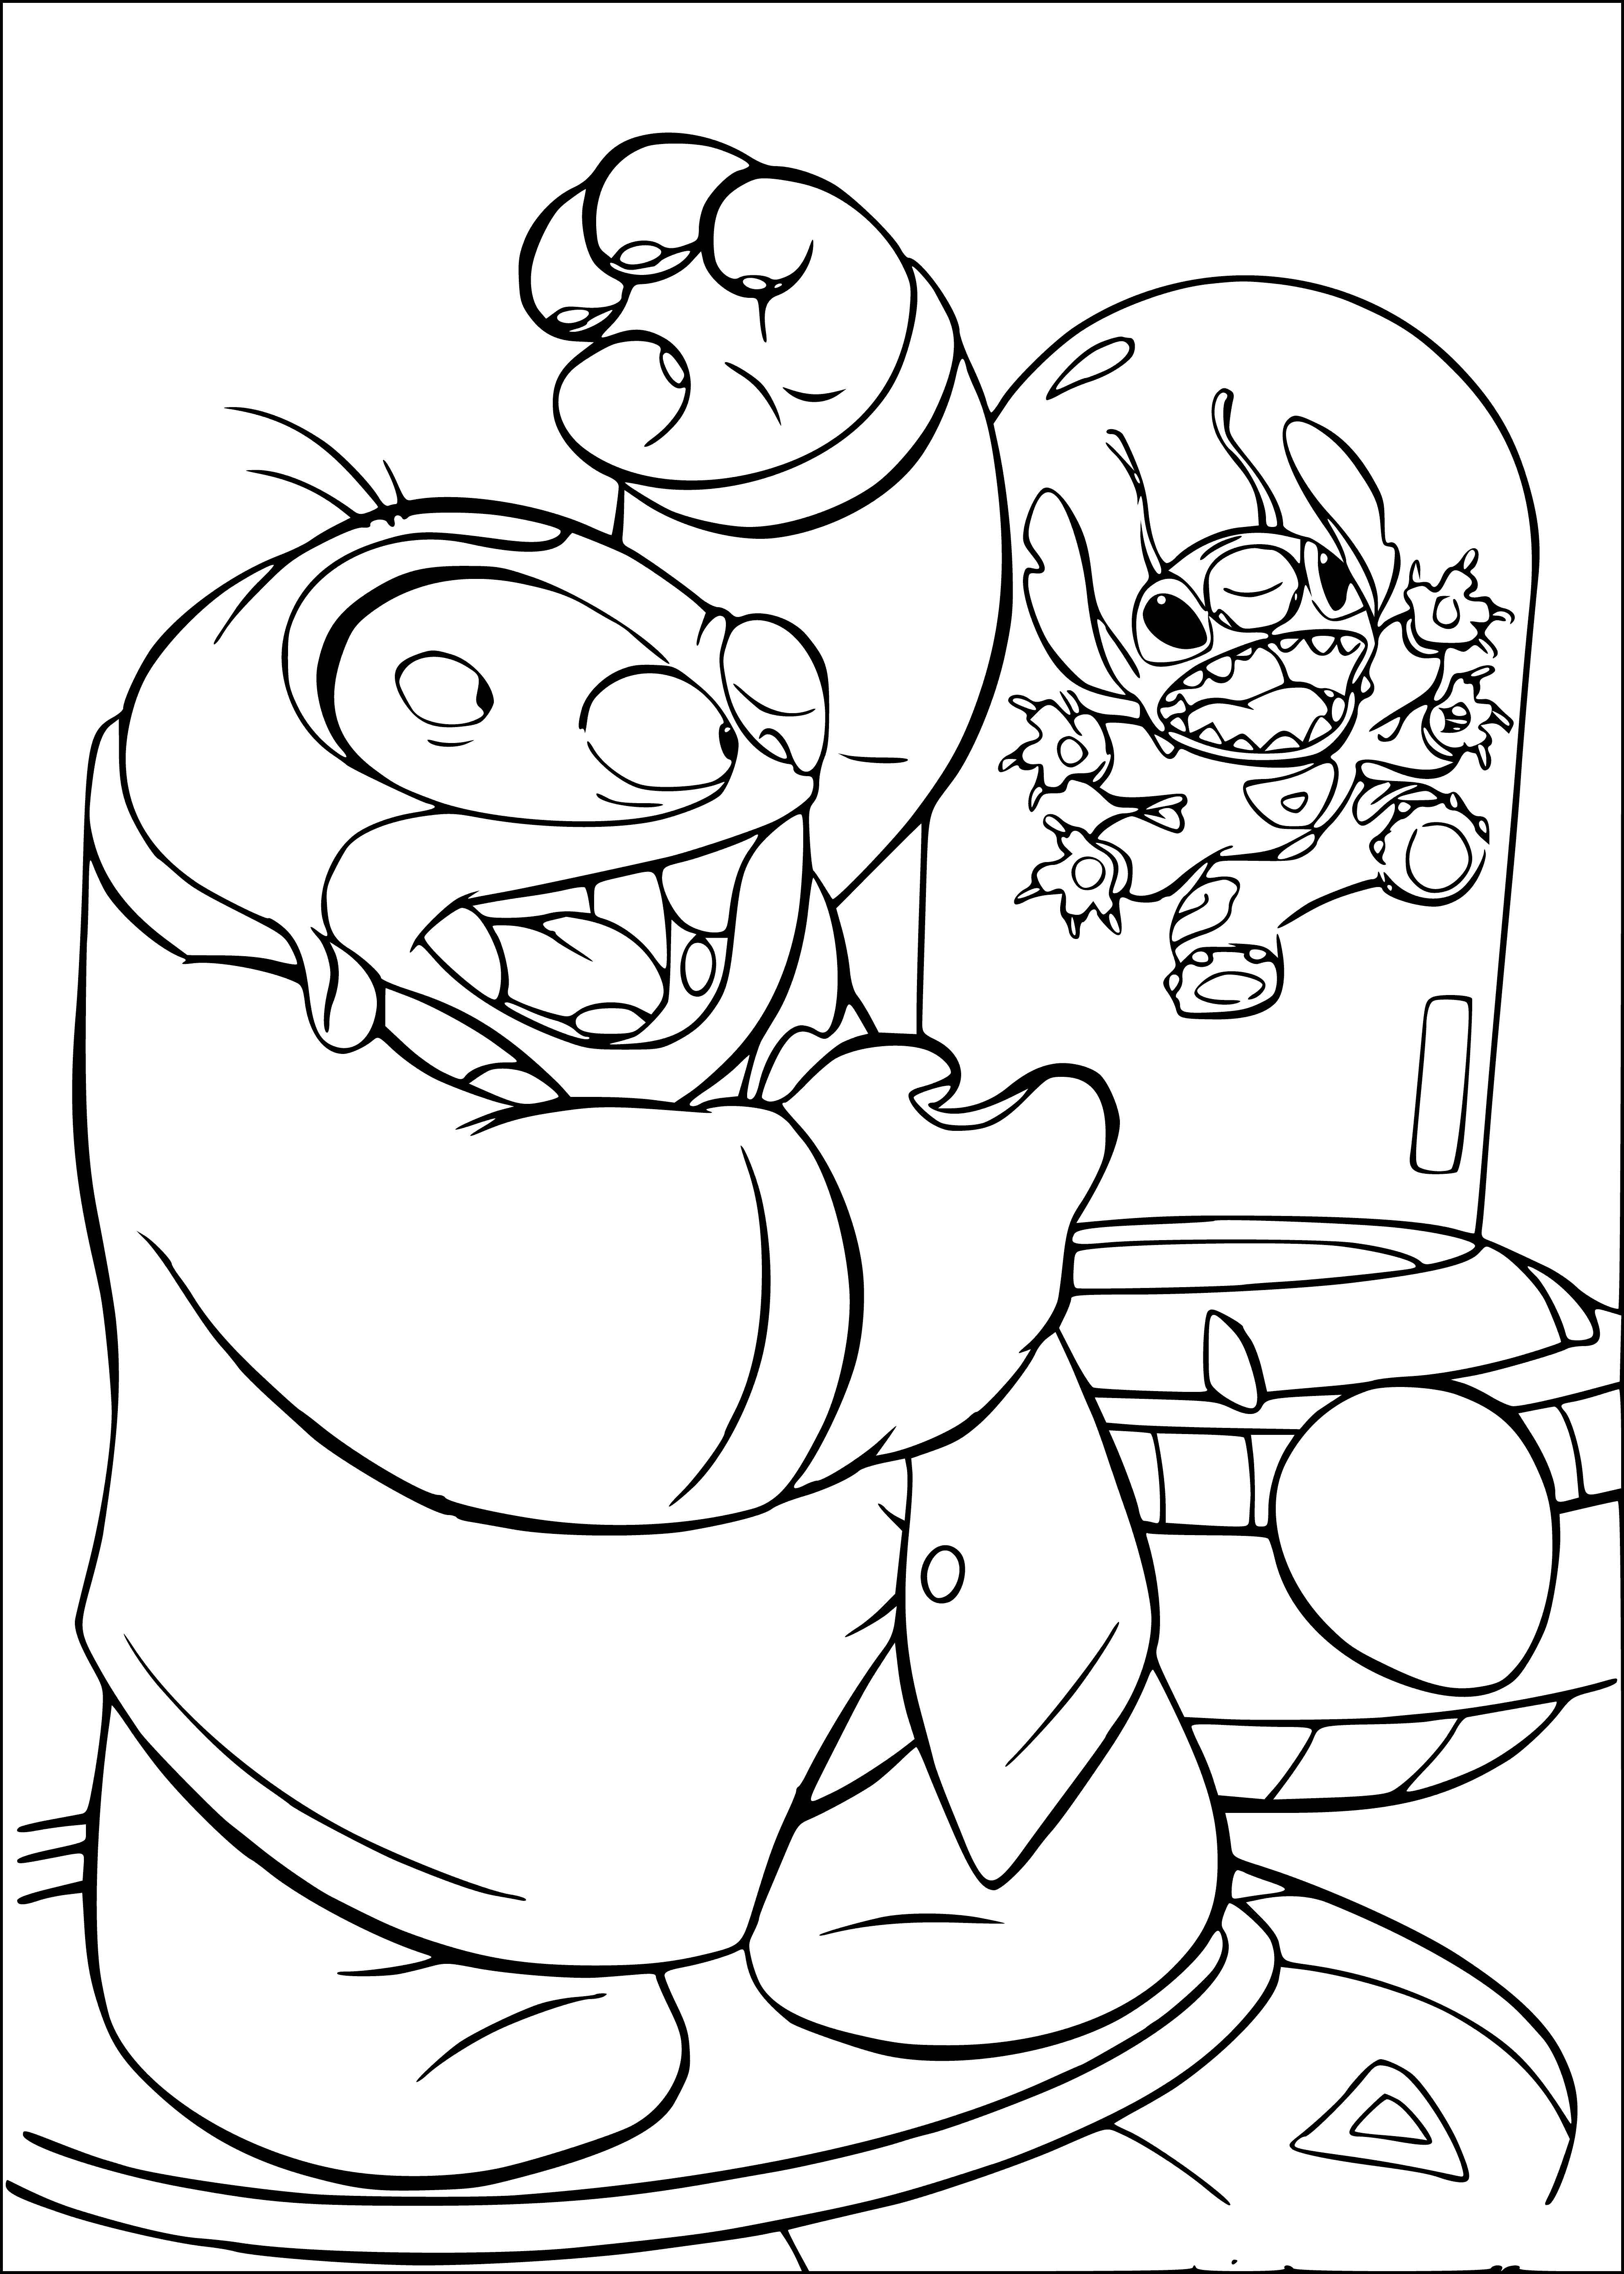 coloring page: Lilo & Stitch hug in the water. Jamba plays guitar, wears yellow shirt & blue shorts, smiles.